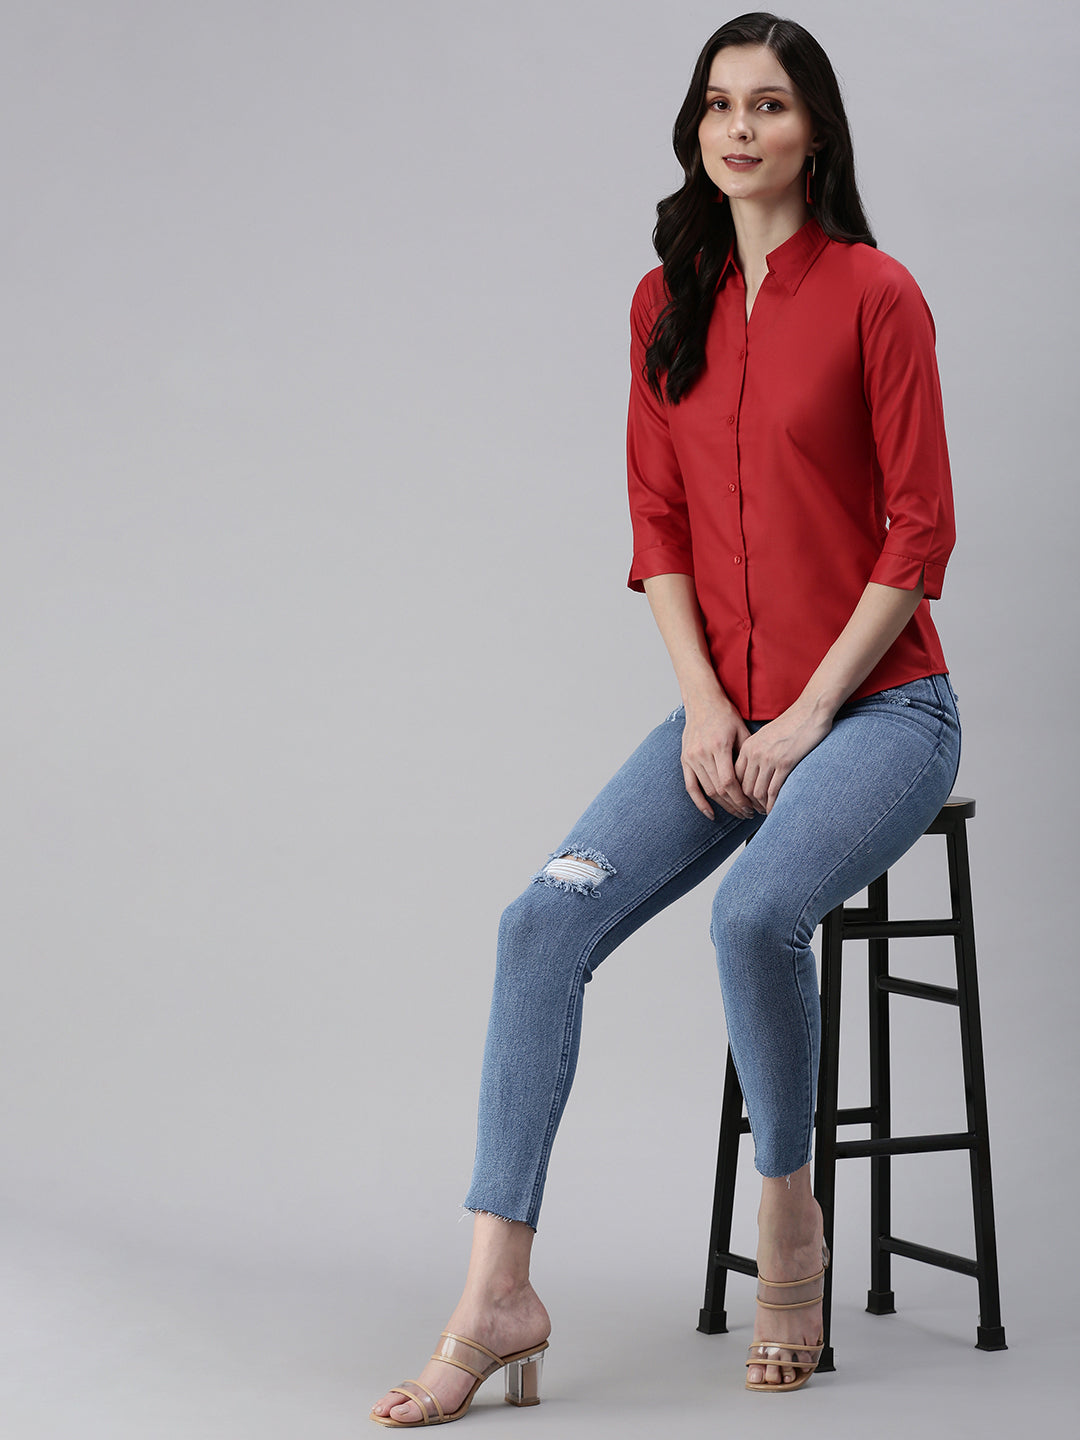 Women's Red Solid Casual Shirts